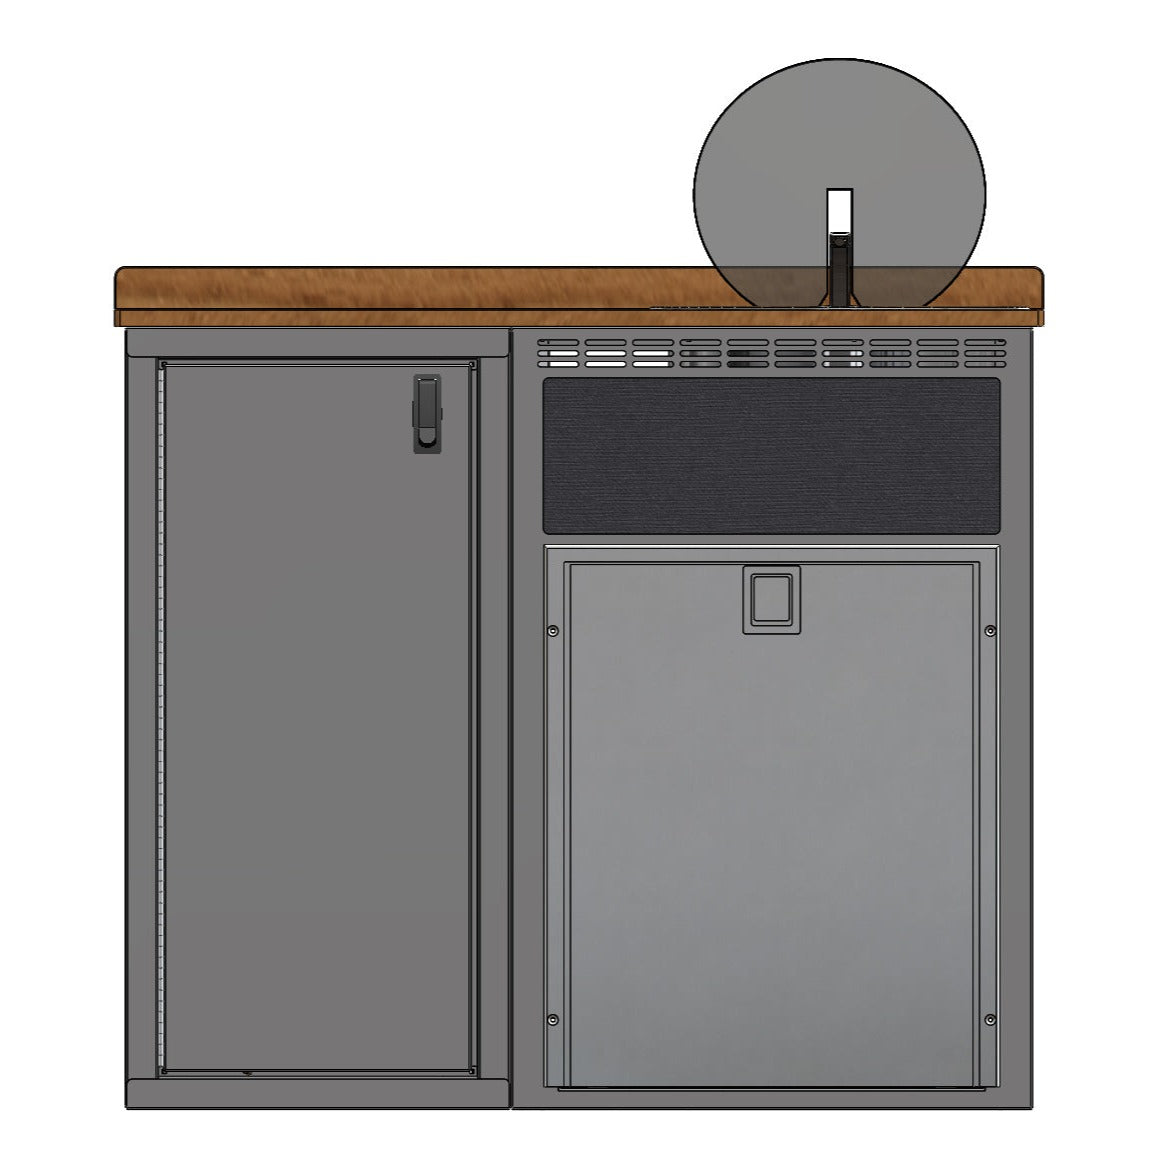 42in Galley - Isotherm 85 Fridge Base Cabinet